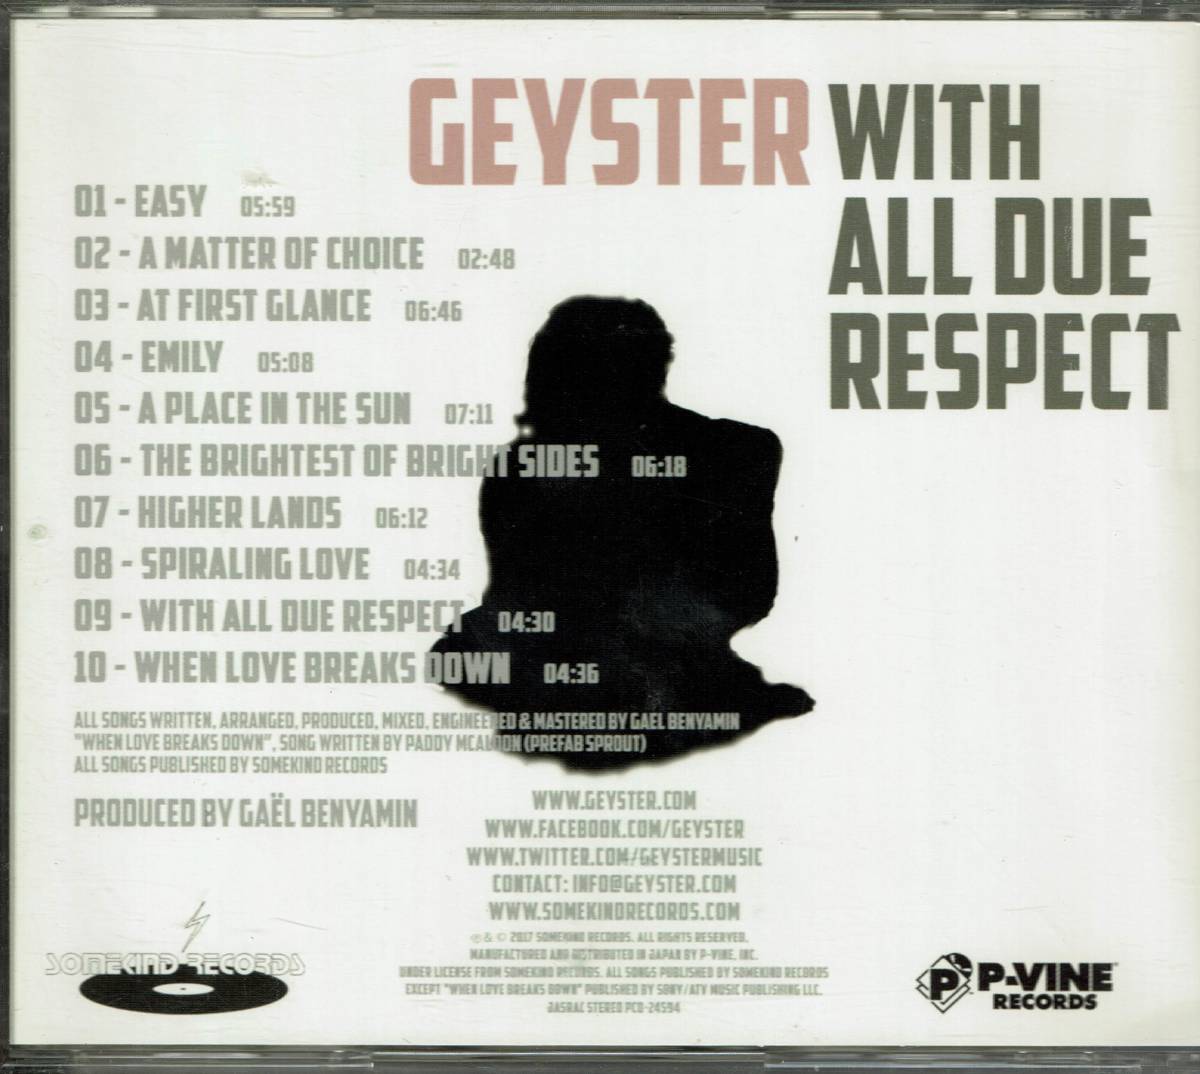 GEYSTER ガイスター WITH ALL DUE RESPECT 帯付き　CD 送料無料_画像3